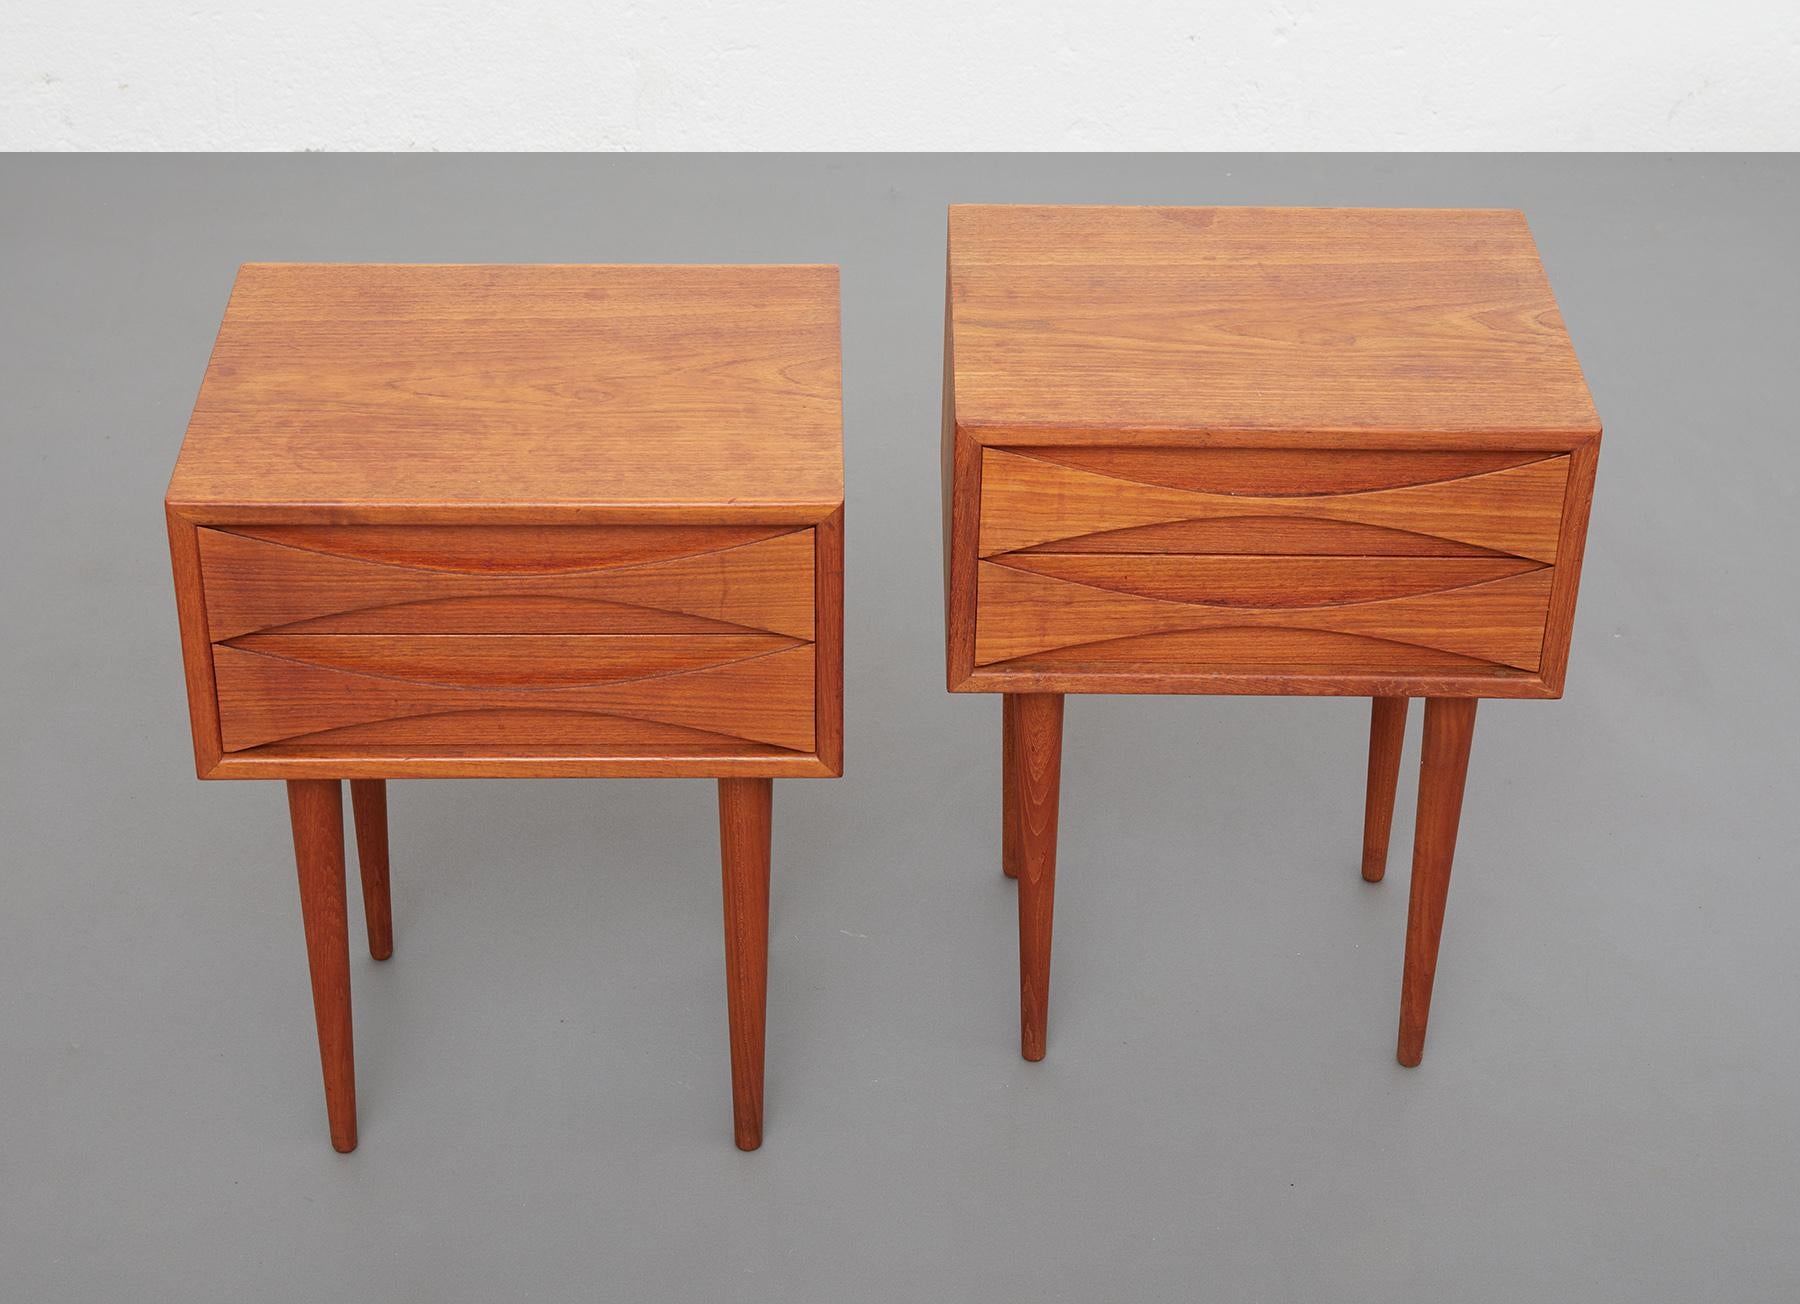 Pair of bedside tables by Danish designer Niels Clausen for NC Mobler, Denmark around 1960

The bedside tables are in teak and are characterized by the elegance of their proportions and shapes. The drawers with their openwork half-moon faces are